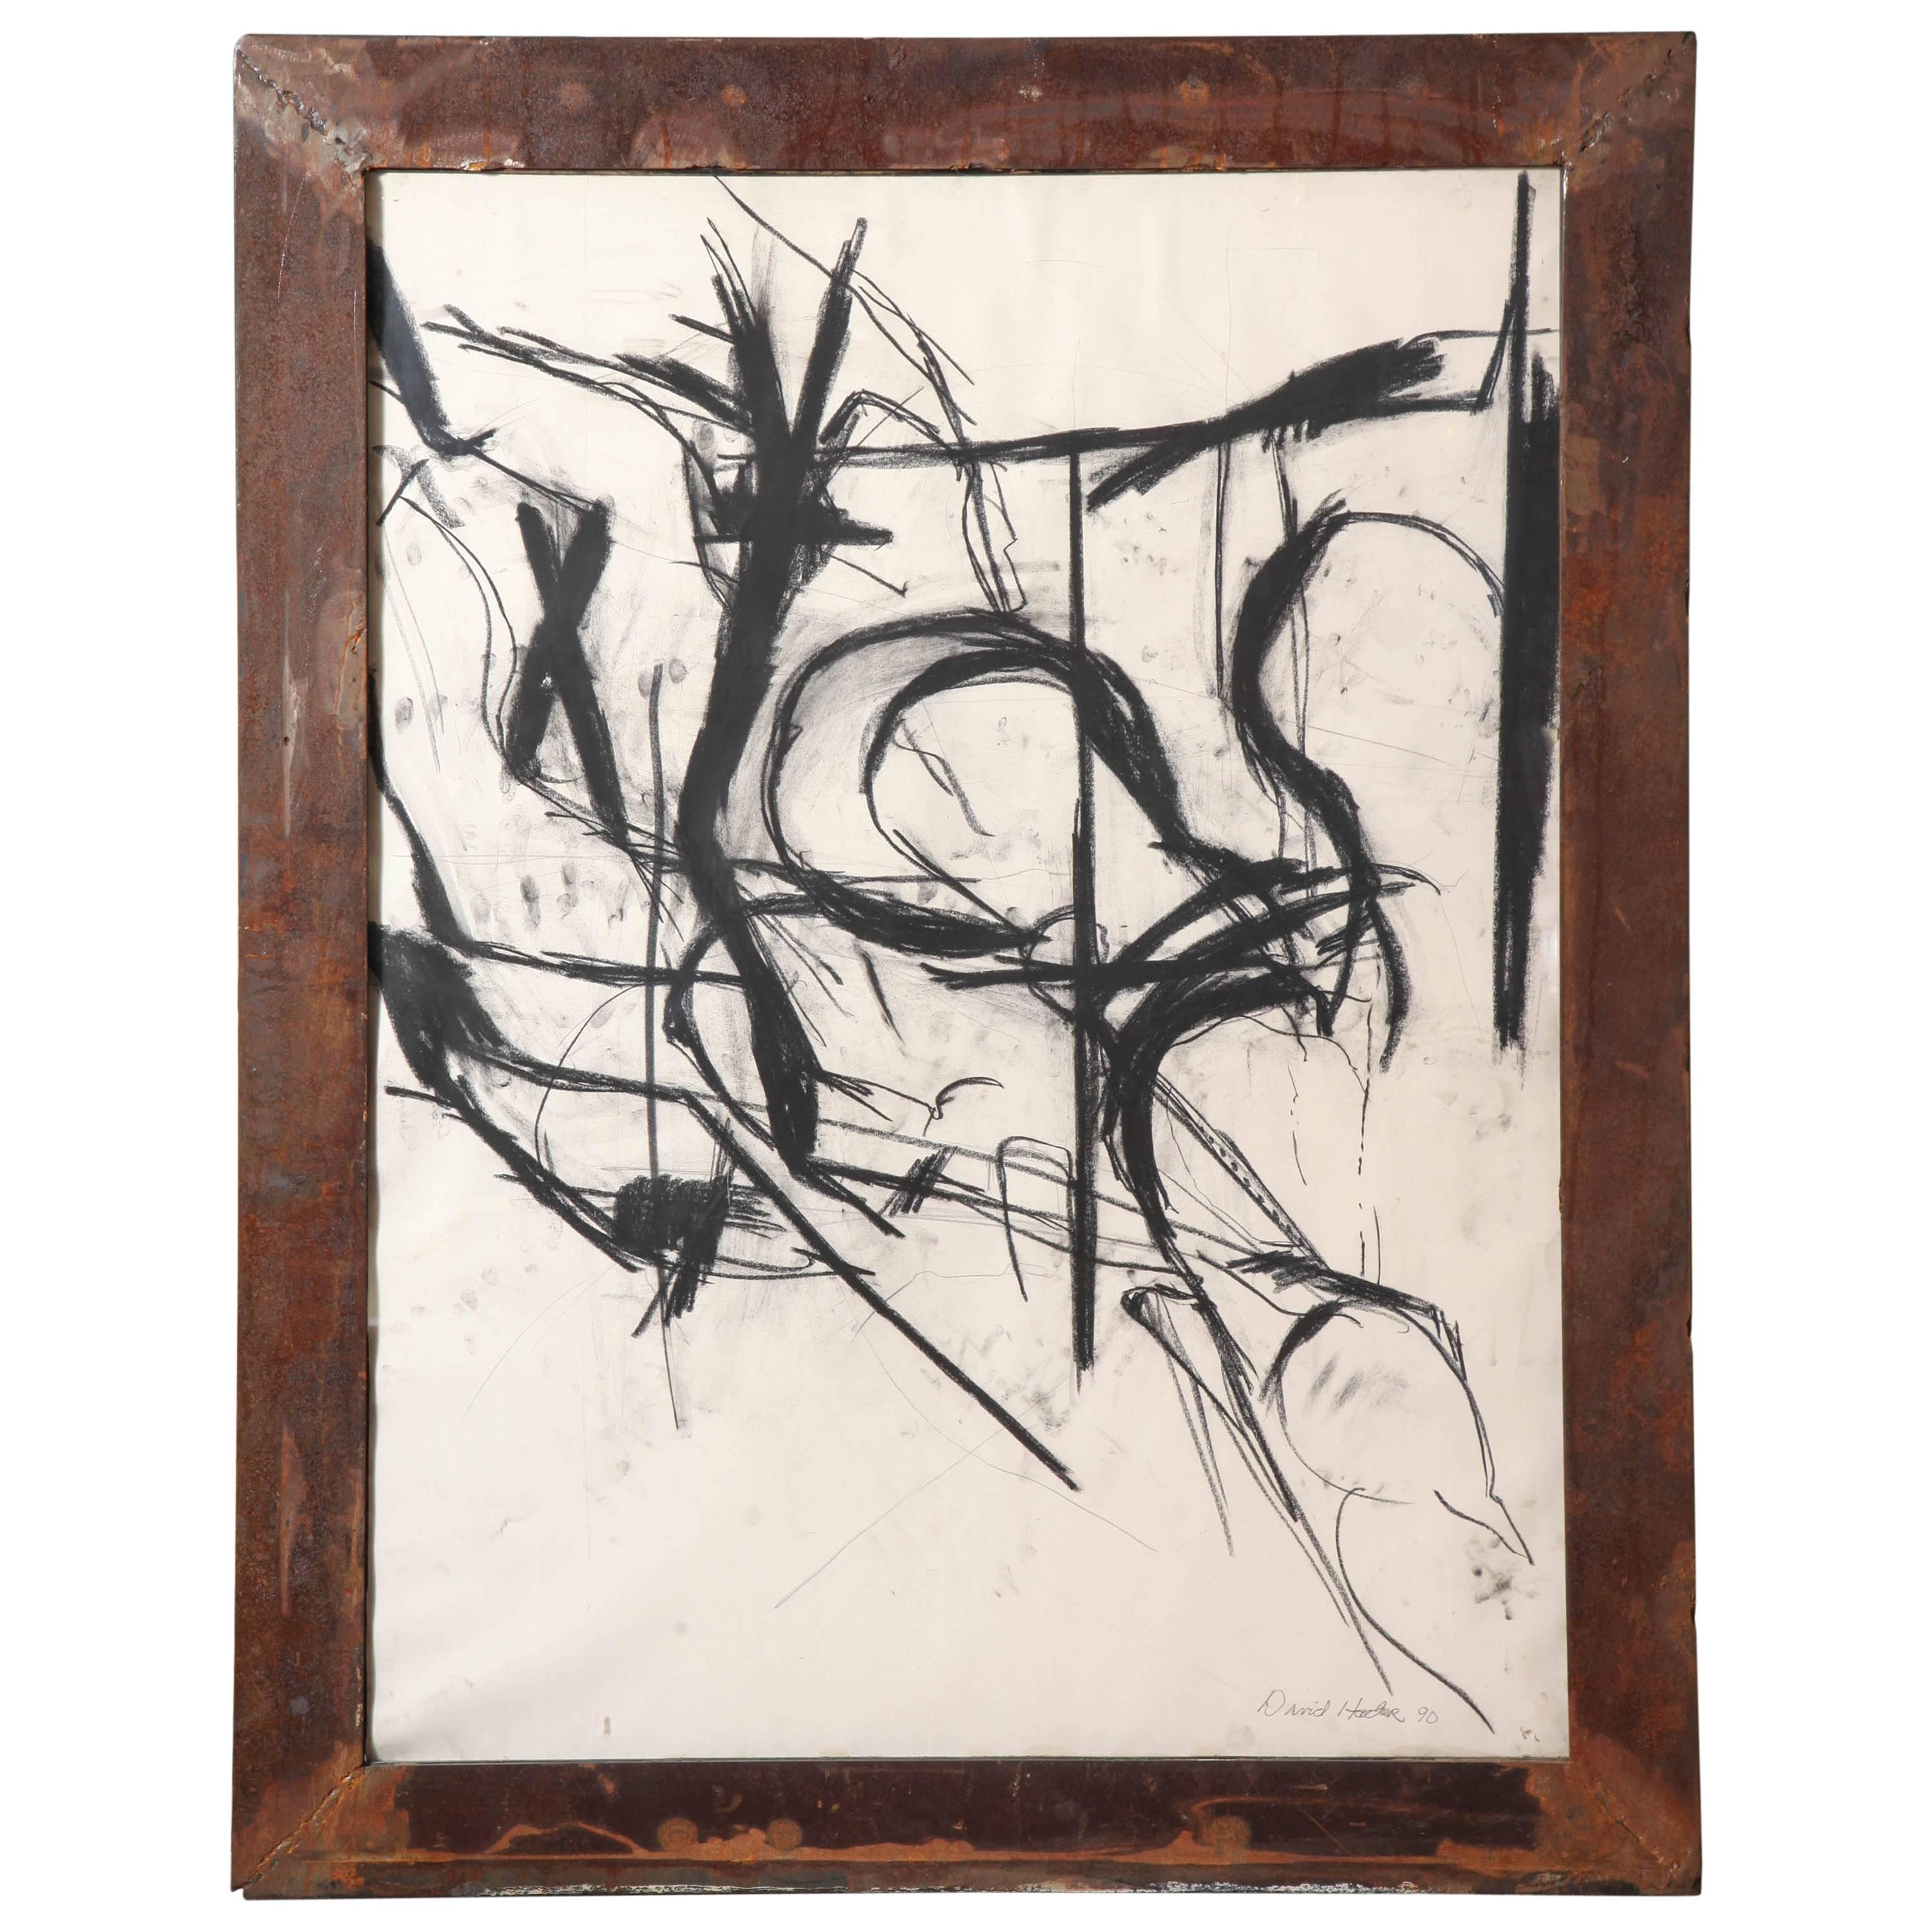 David Hacker Charcoal Drawing in Steel Frame Sculpted by Artist